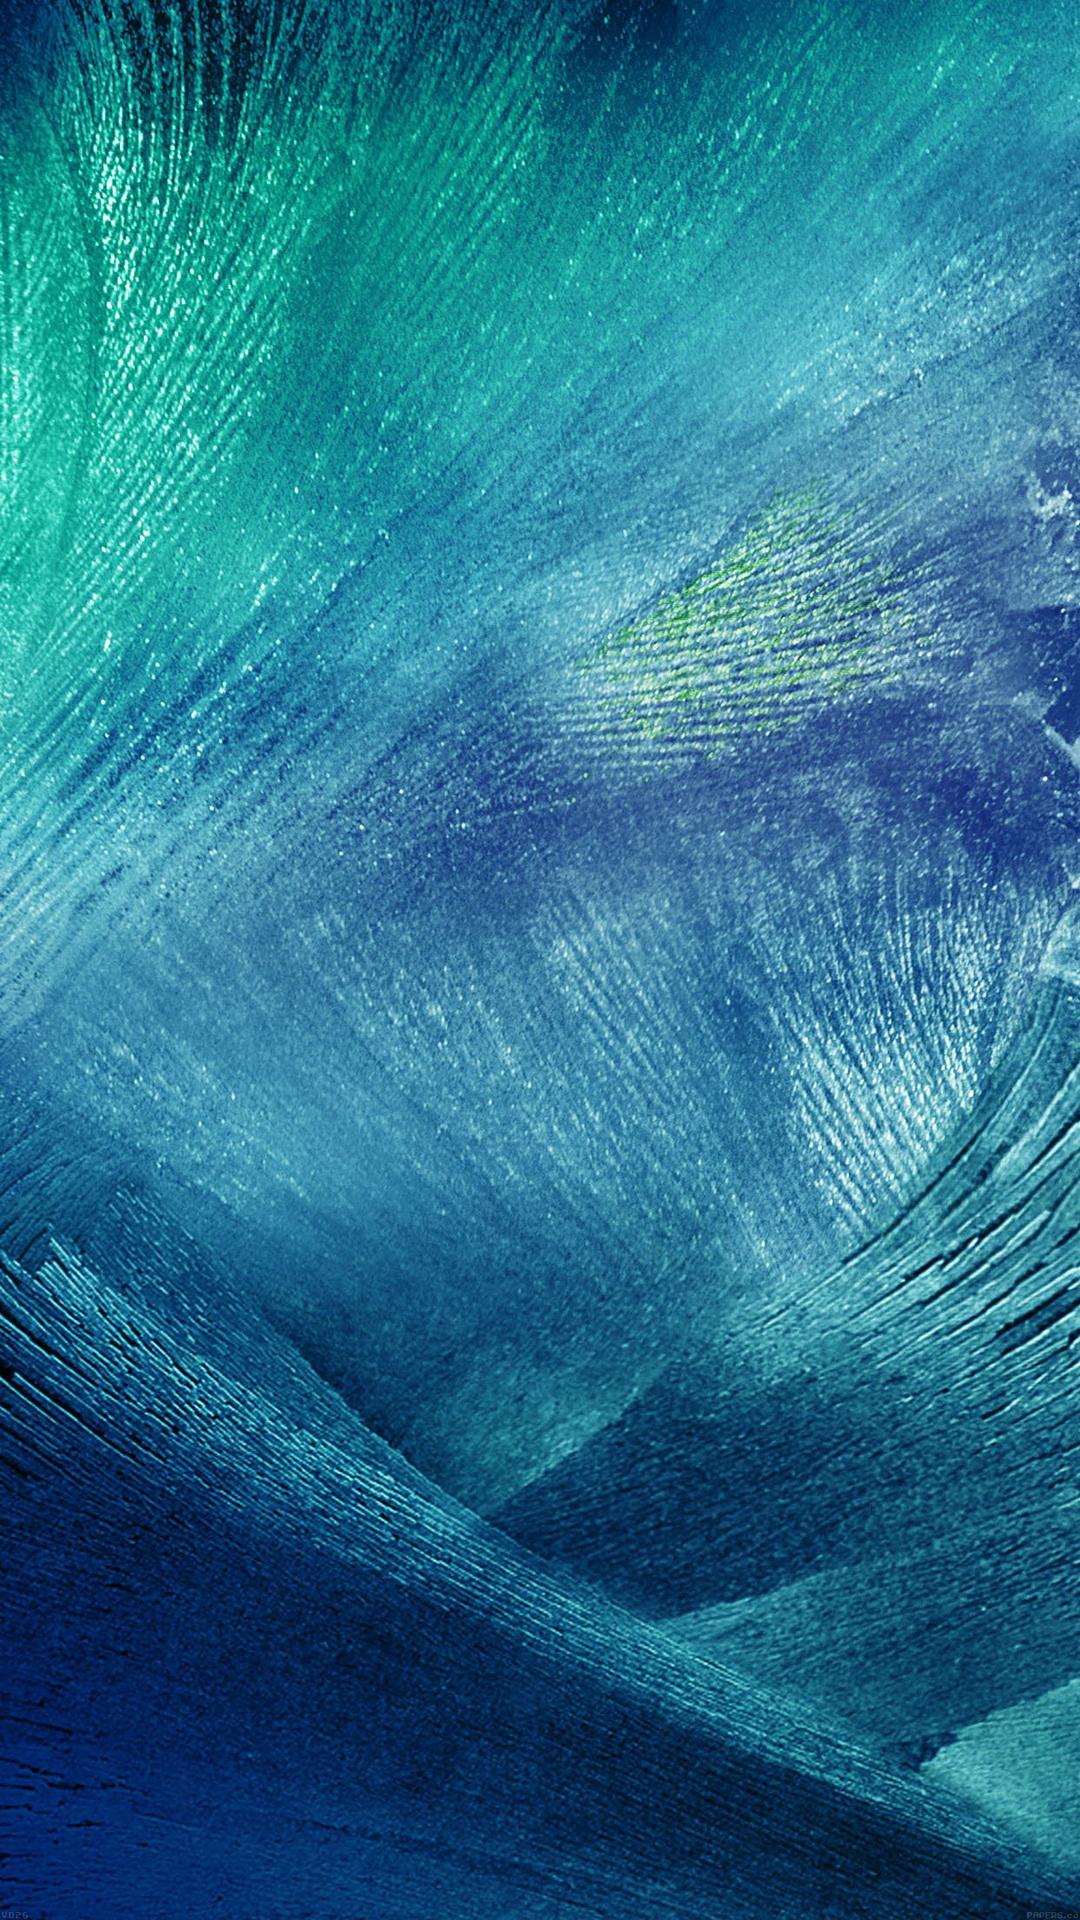 Blue Icy texture htc one wallpaper, free and easy to download